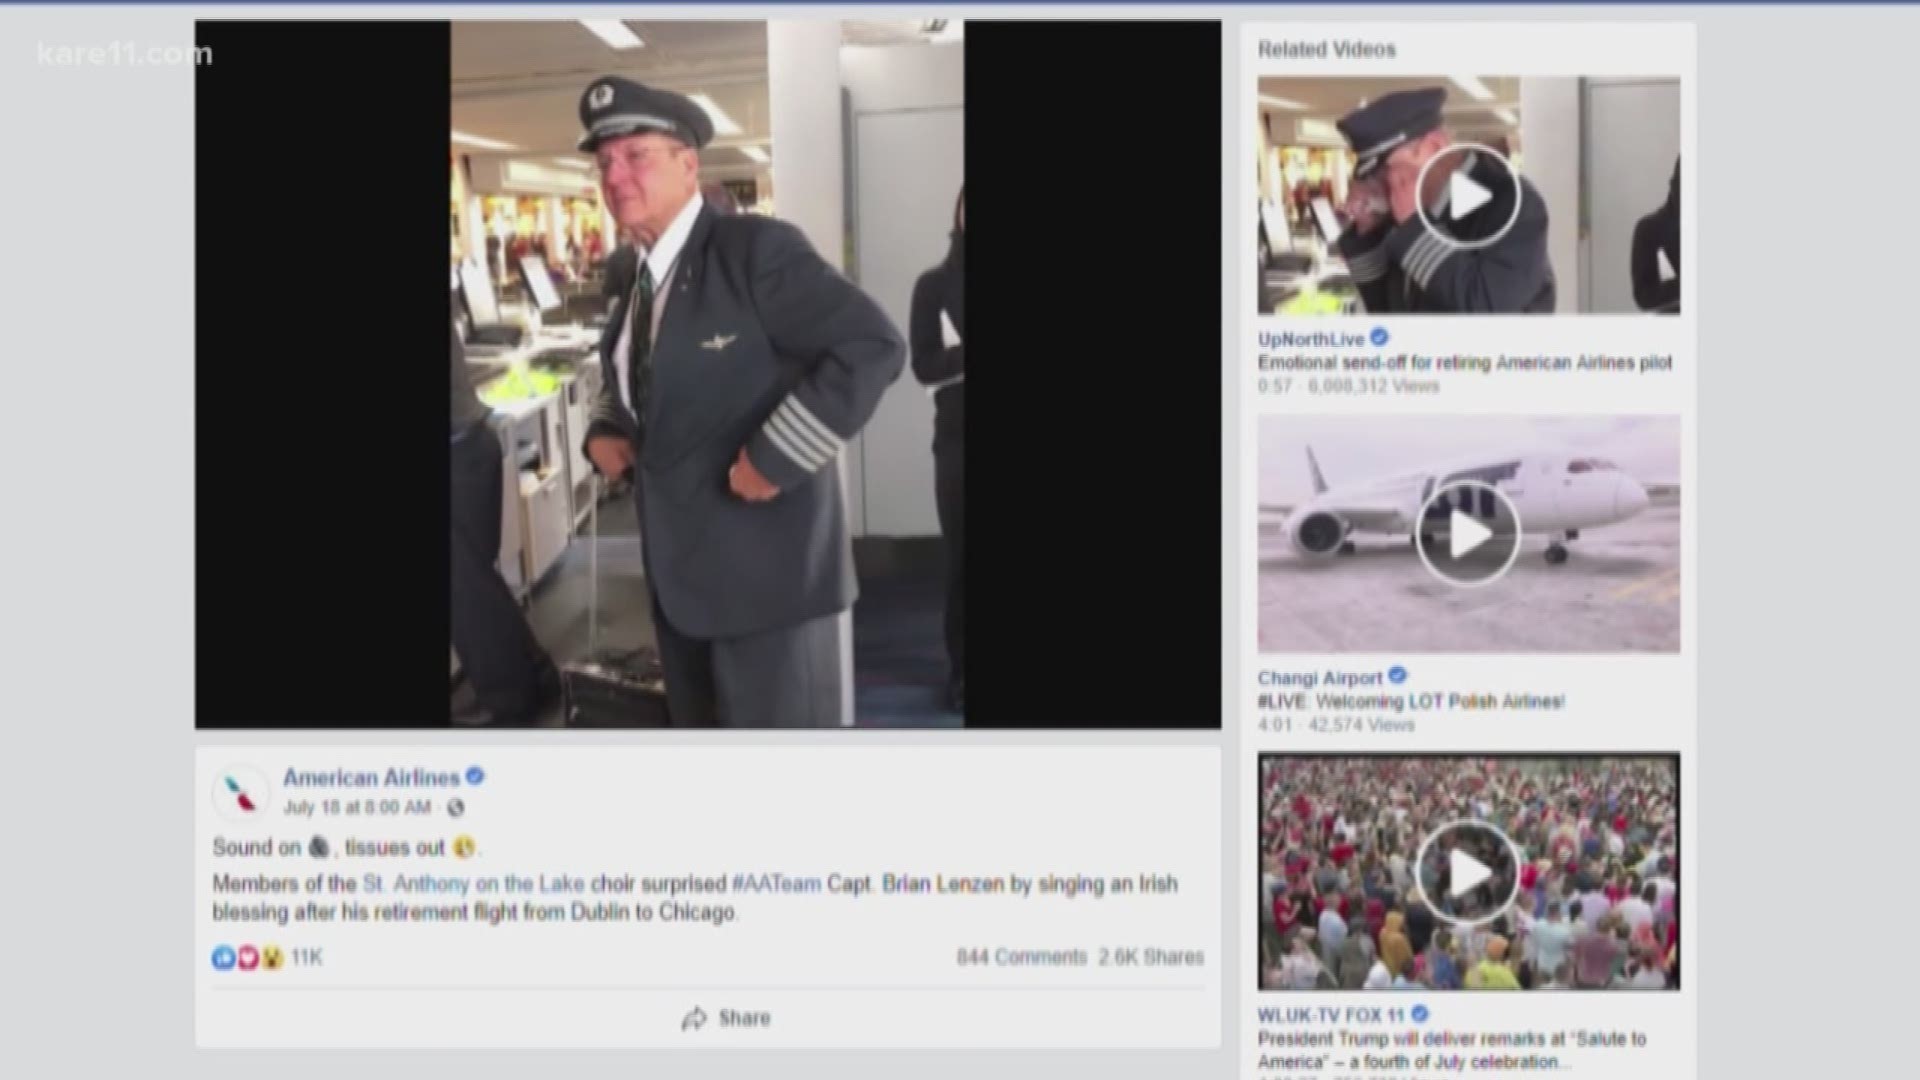 The video of Lenzen listening to the choir, wiping his eyes with a handkerchief, has been shared from the American Airlines page more than 2,600 times.